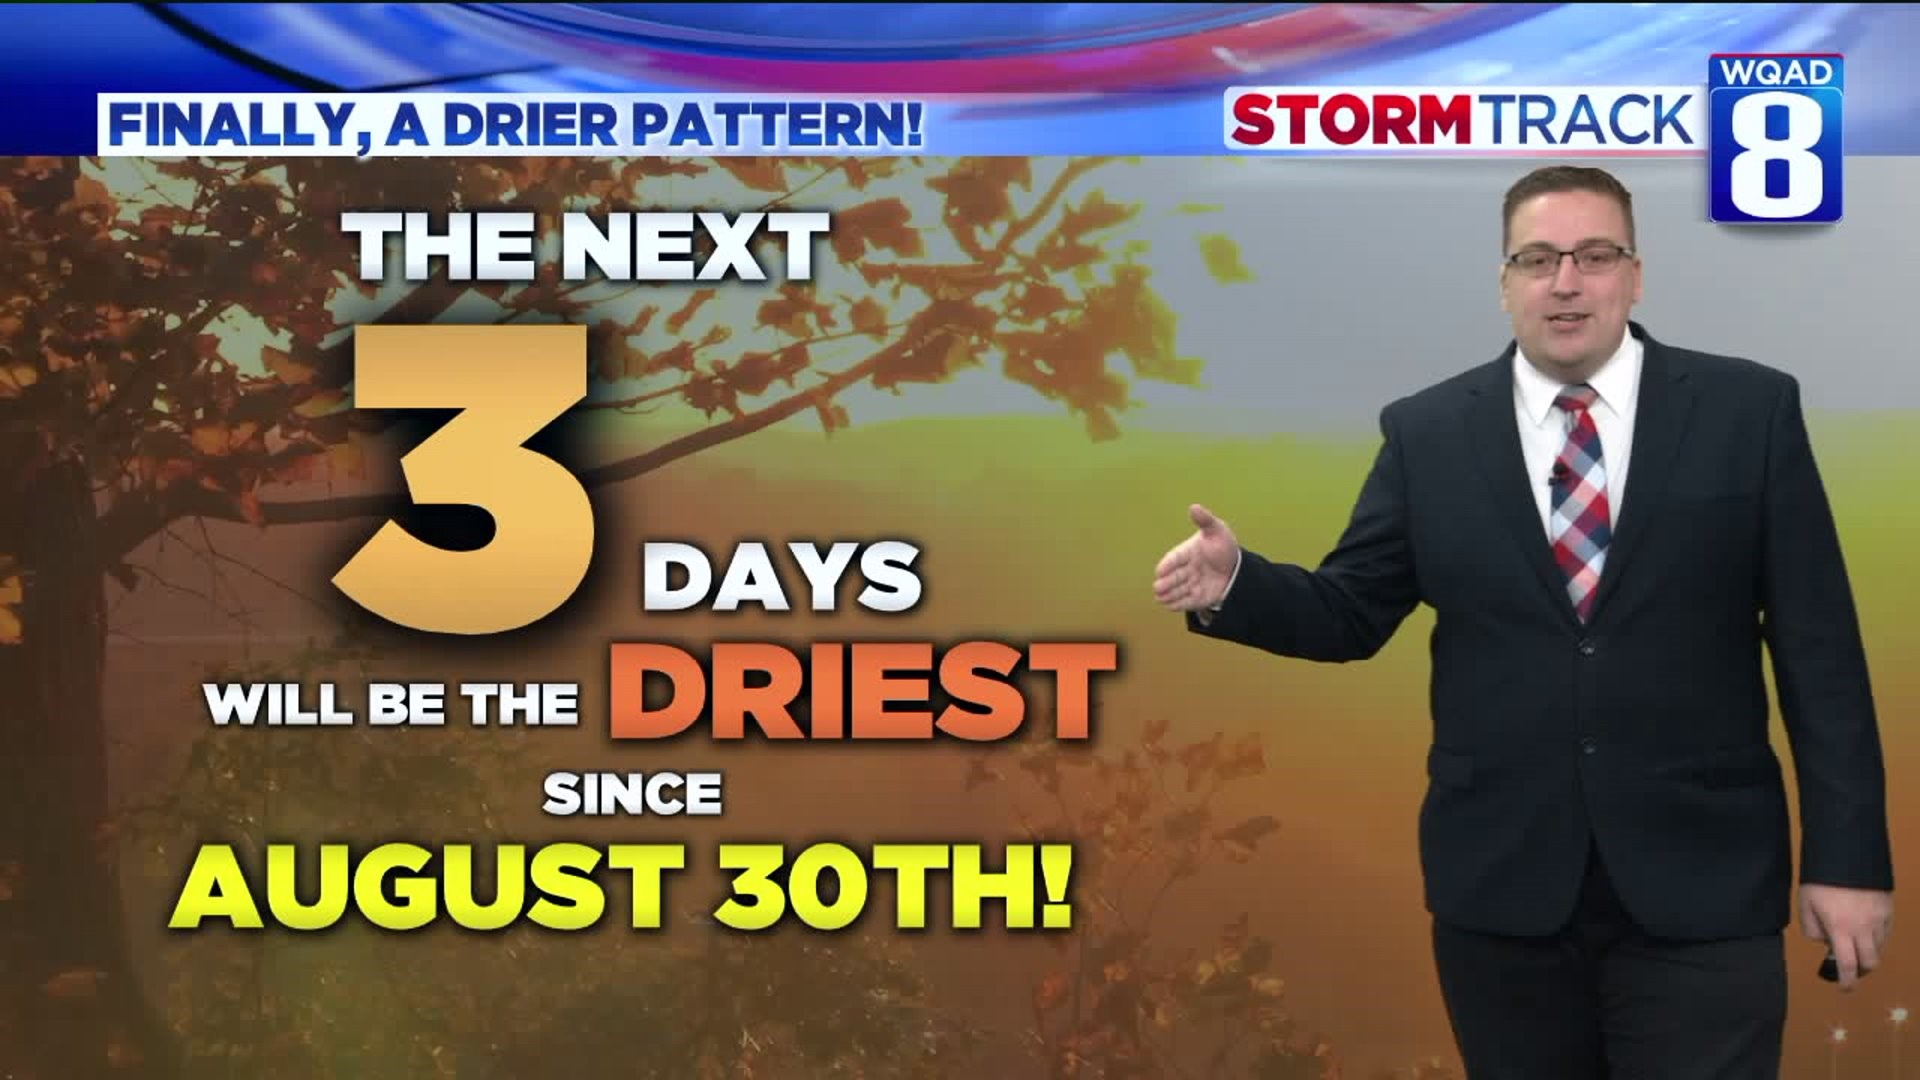 Tracking the driest weather pattern since August